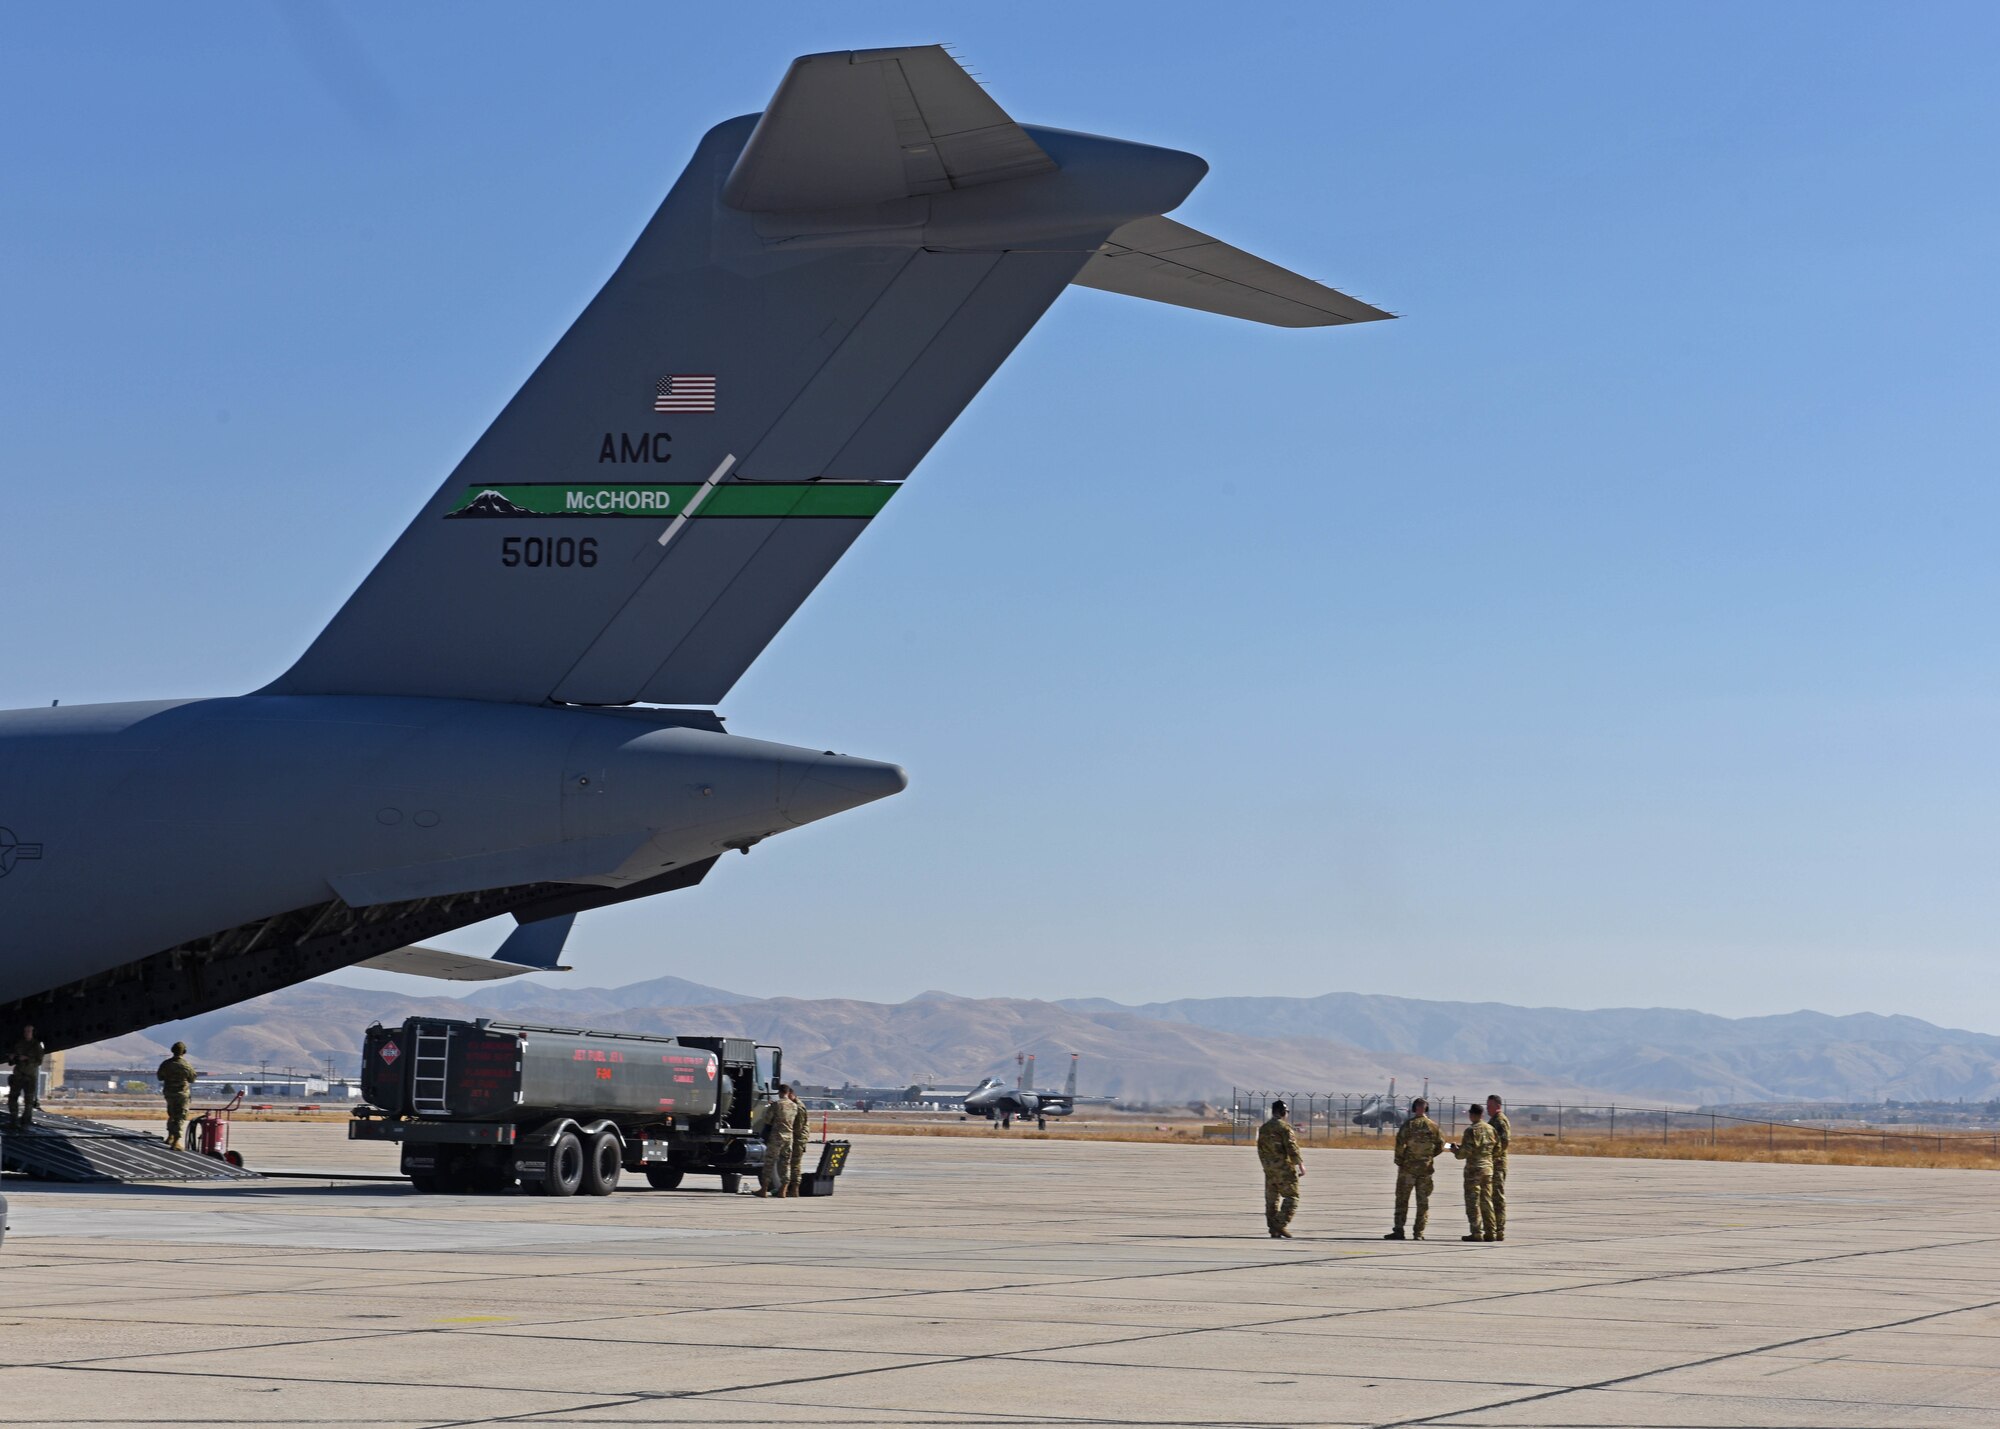 U.S. Airmen with the 62d Airlift Wing and 627th Air Base Group prepare to execute special fueling operations while an F-15E Strike Eagle aircraft lands on the flightline at Gowen Field, Boise, Idaho, Oct. 20, 2022. Special fueling operations were conducted by the 62d AW’s C-17 Globemaster III aircraft and the 366th Fighter Wing’s F-15 as part of Exercise Rainier War 22B. (U.S. Air Force photo by Staff Sgt. Zoe Thacker)